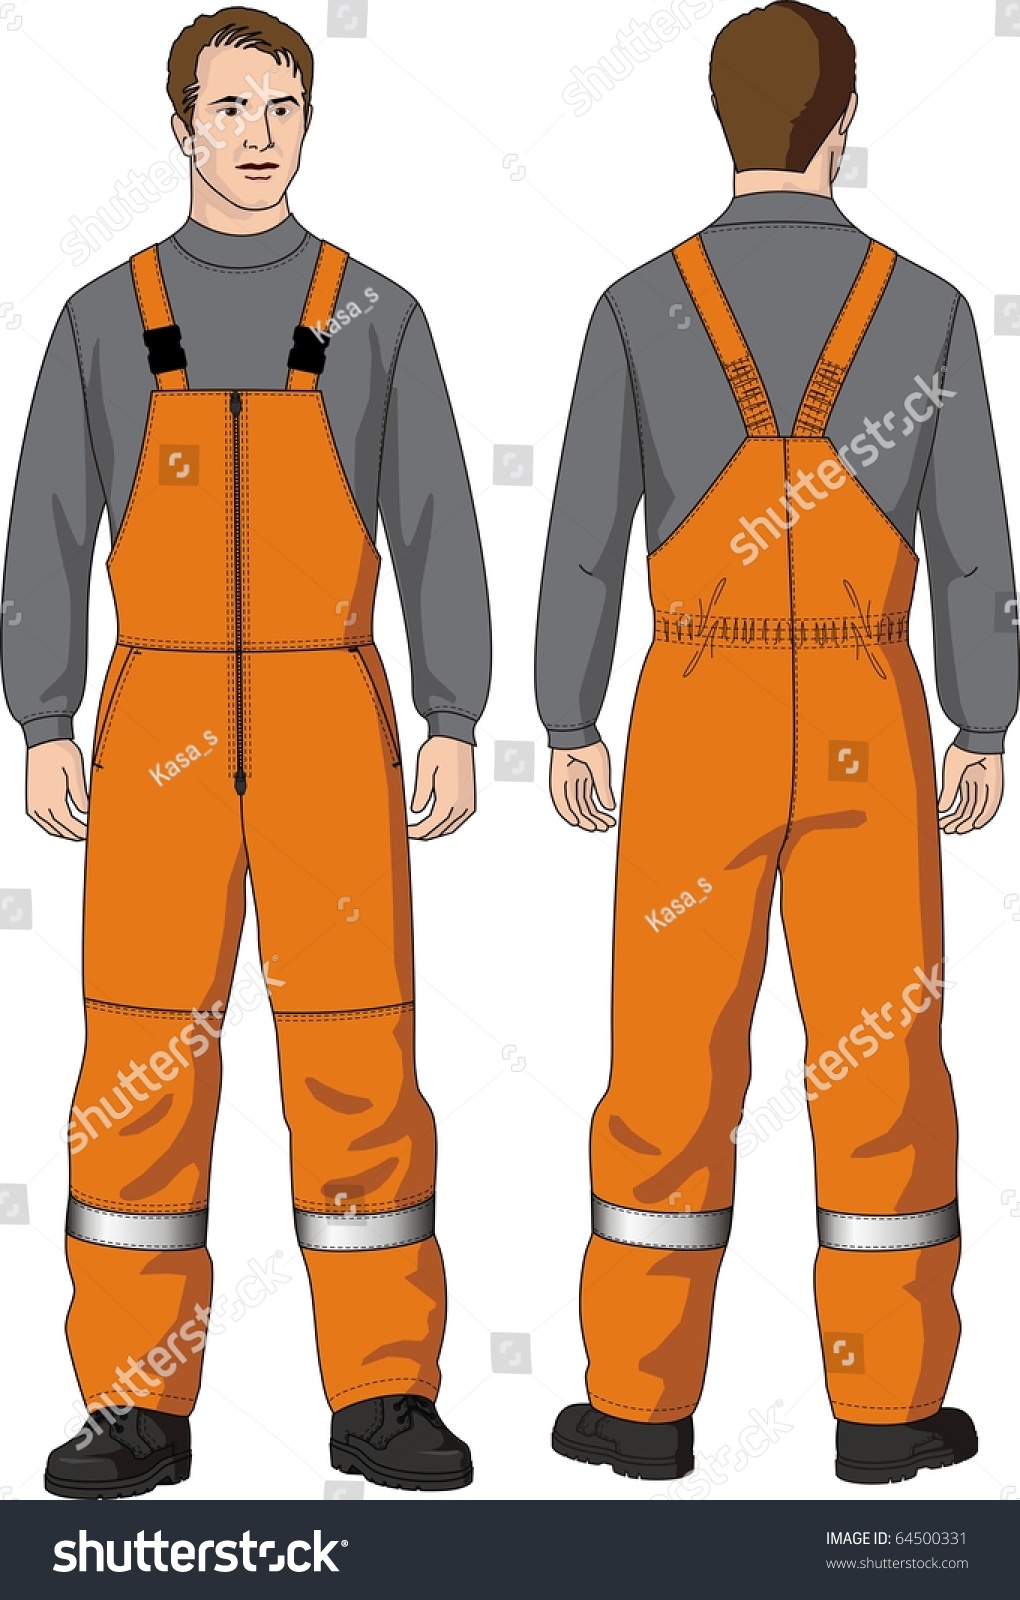 Orange Overalls For Man Warmed With Pockets Stock Vector Illustration ...